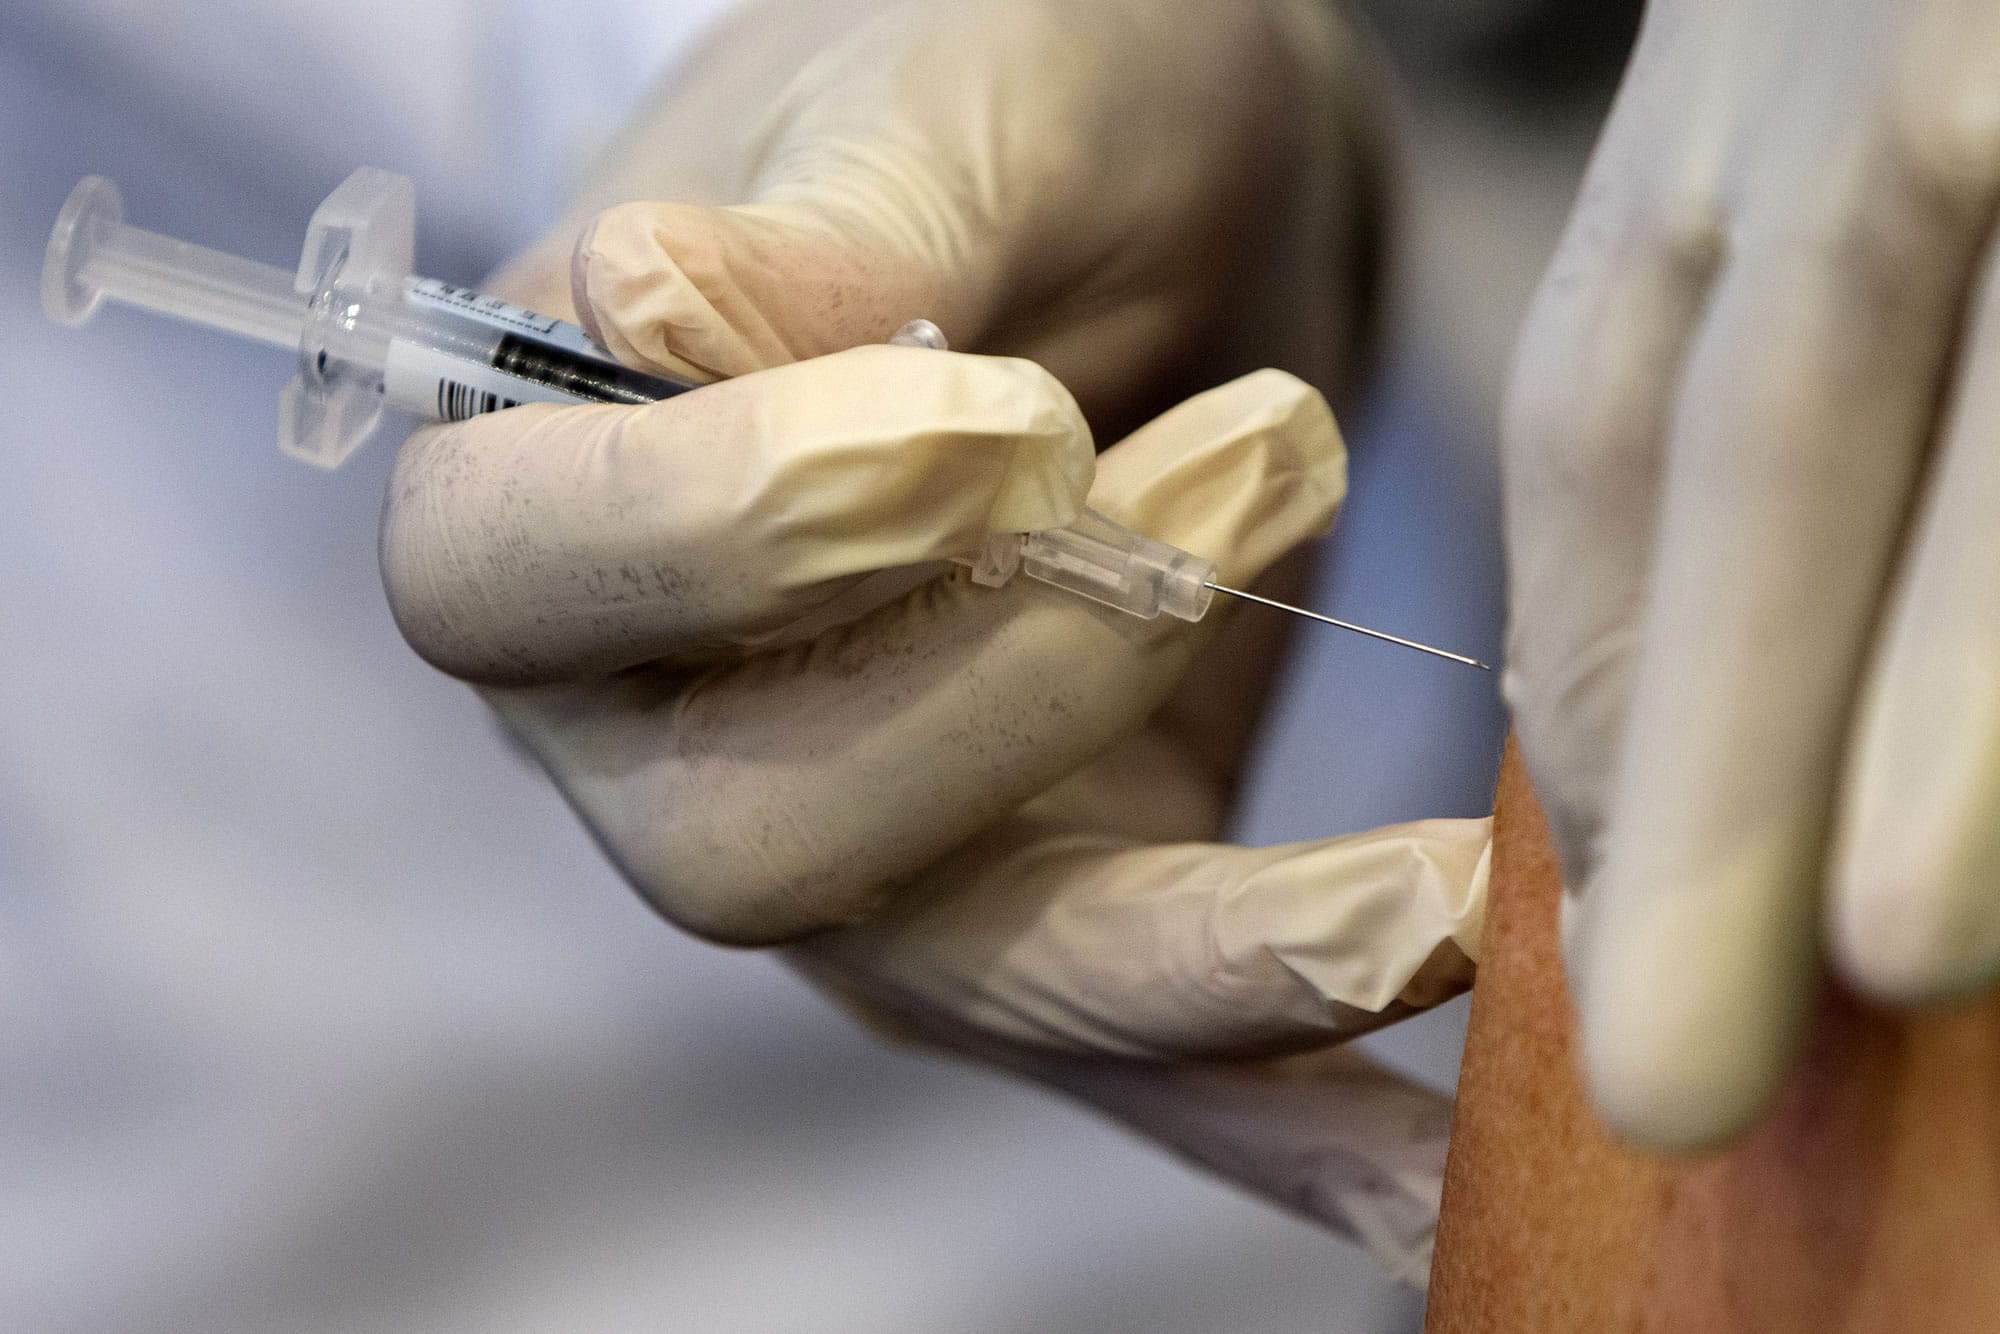 A nurse administers a flu vaccine shot in Washington. Medical expenses are a burden whenever they hit, but a recent study found they’re most common around the first few months of the year.